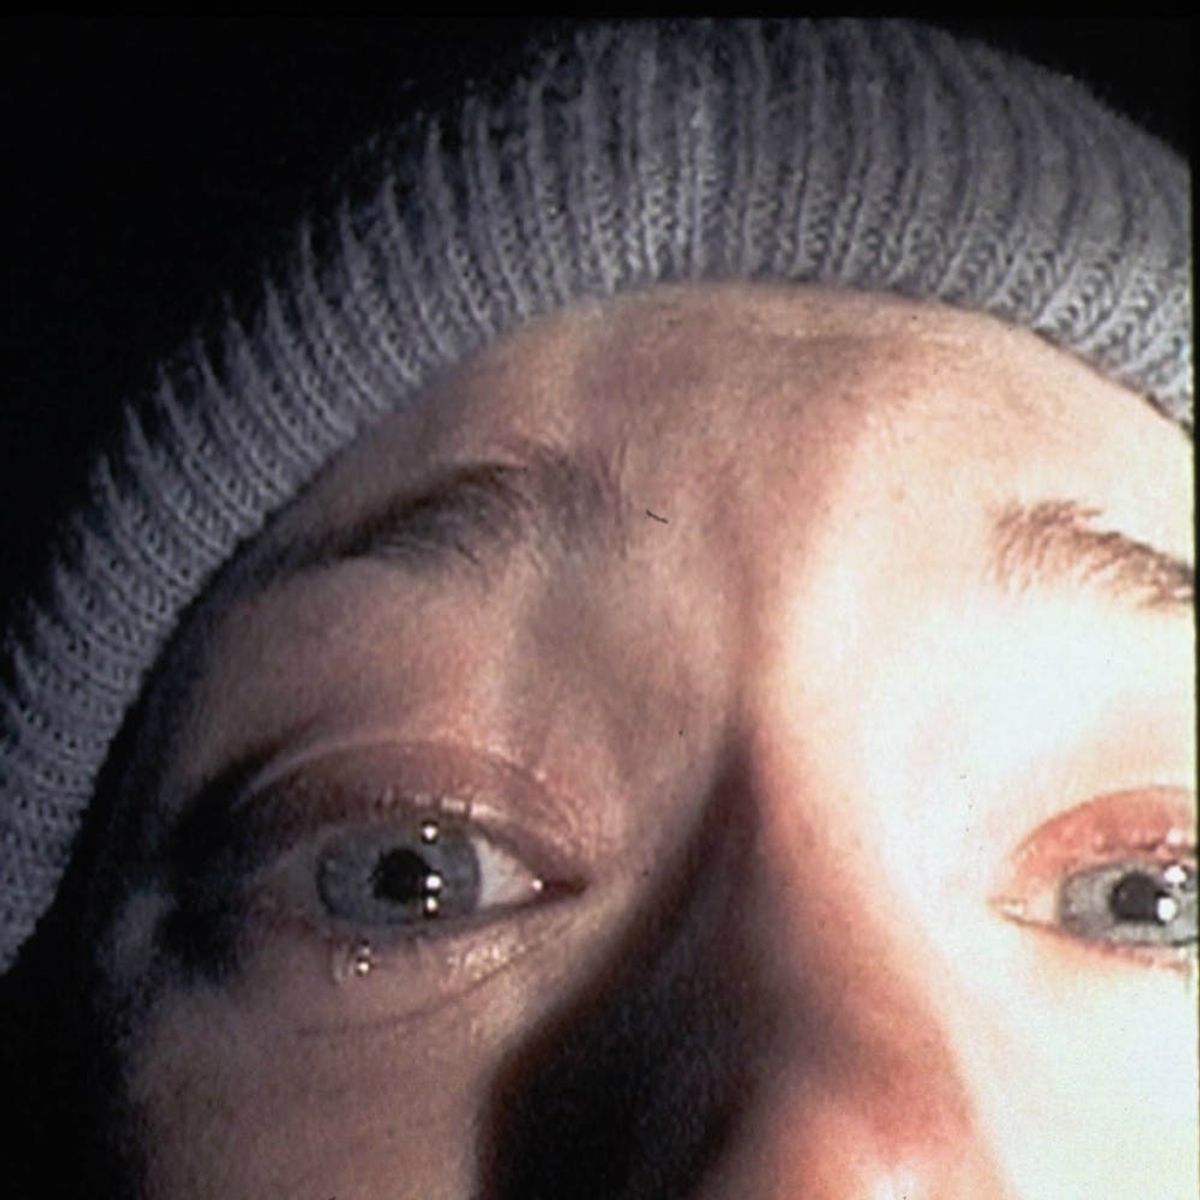 The Blair Witch Project Is Officially Getting a New Sequel and It Looks Absolutely Terrifying